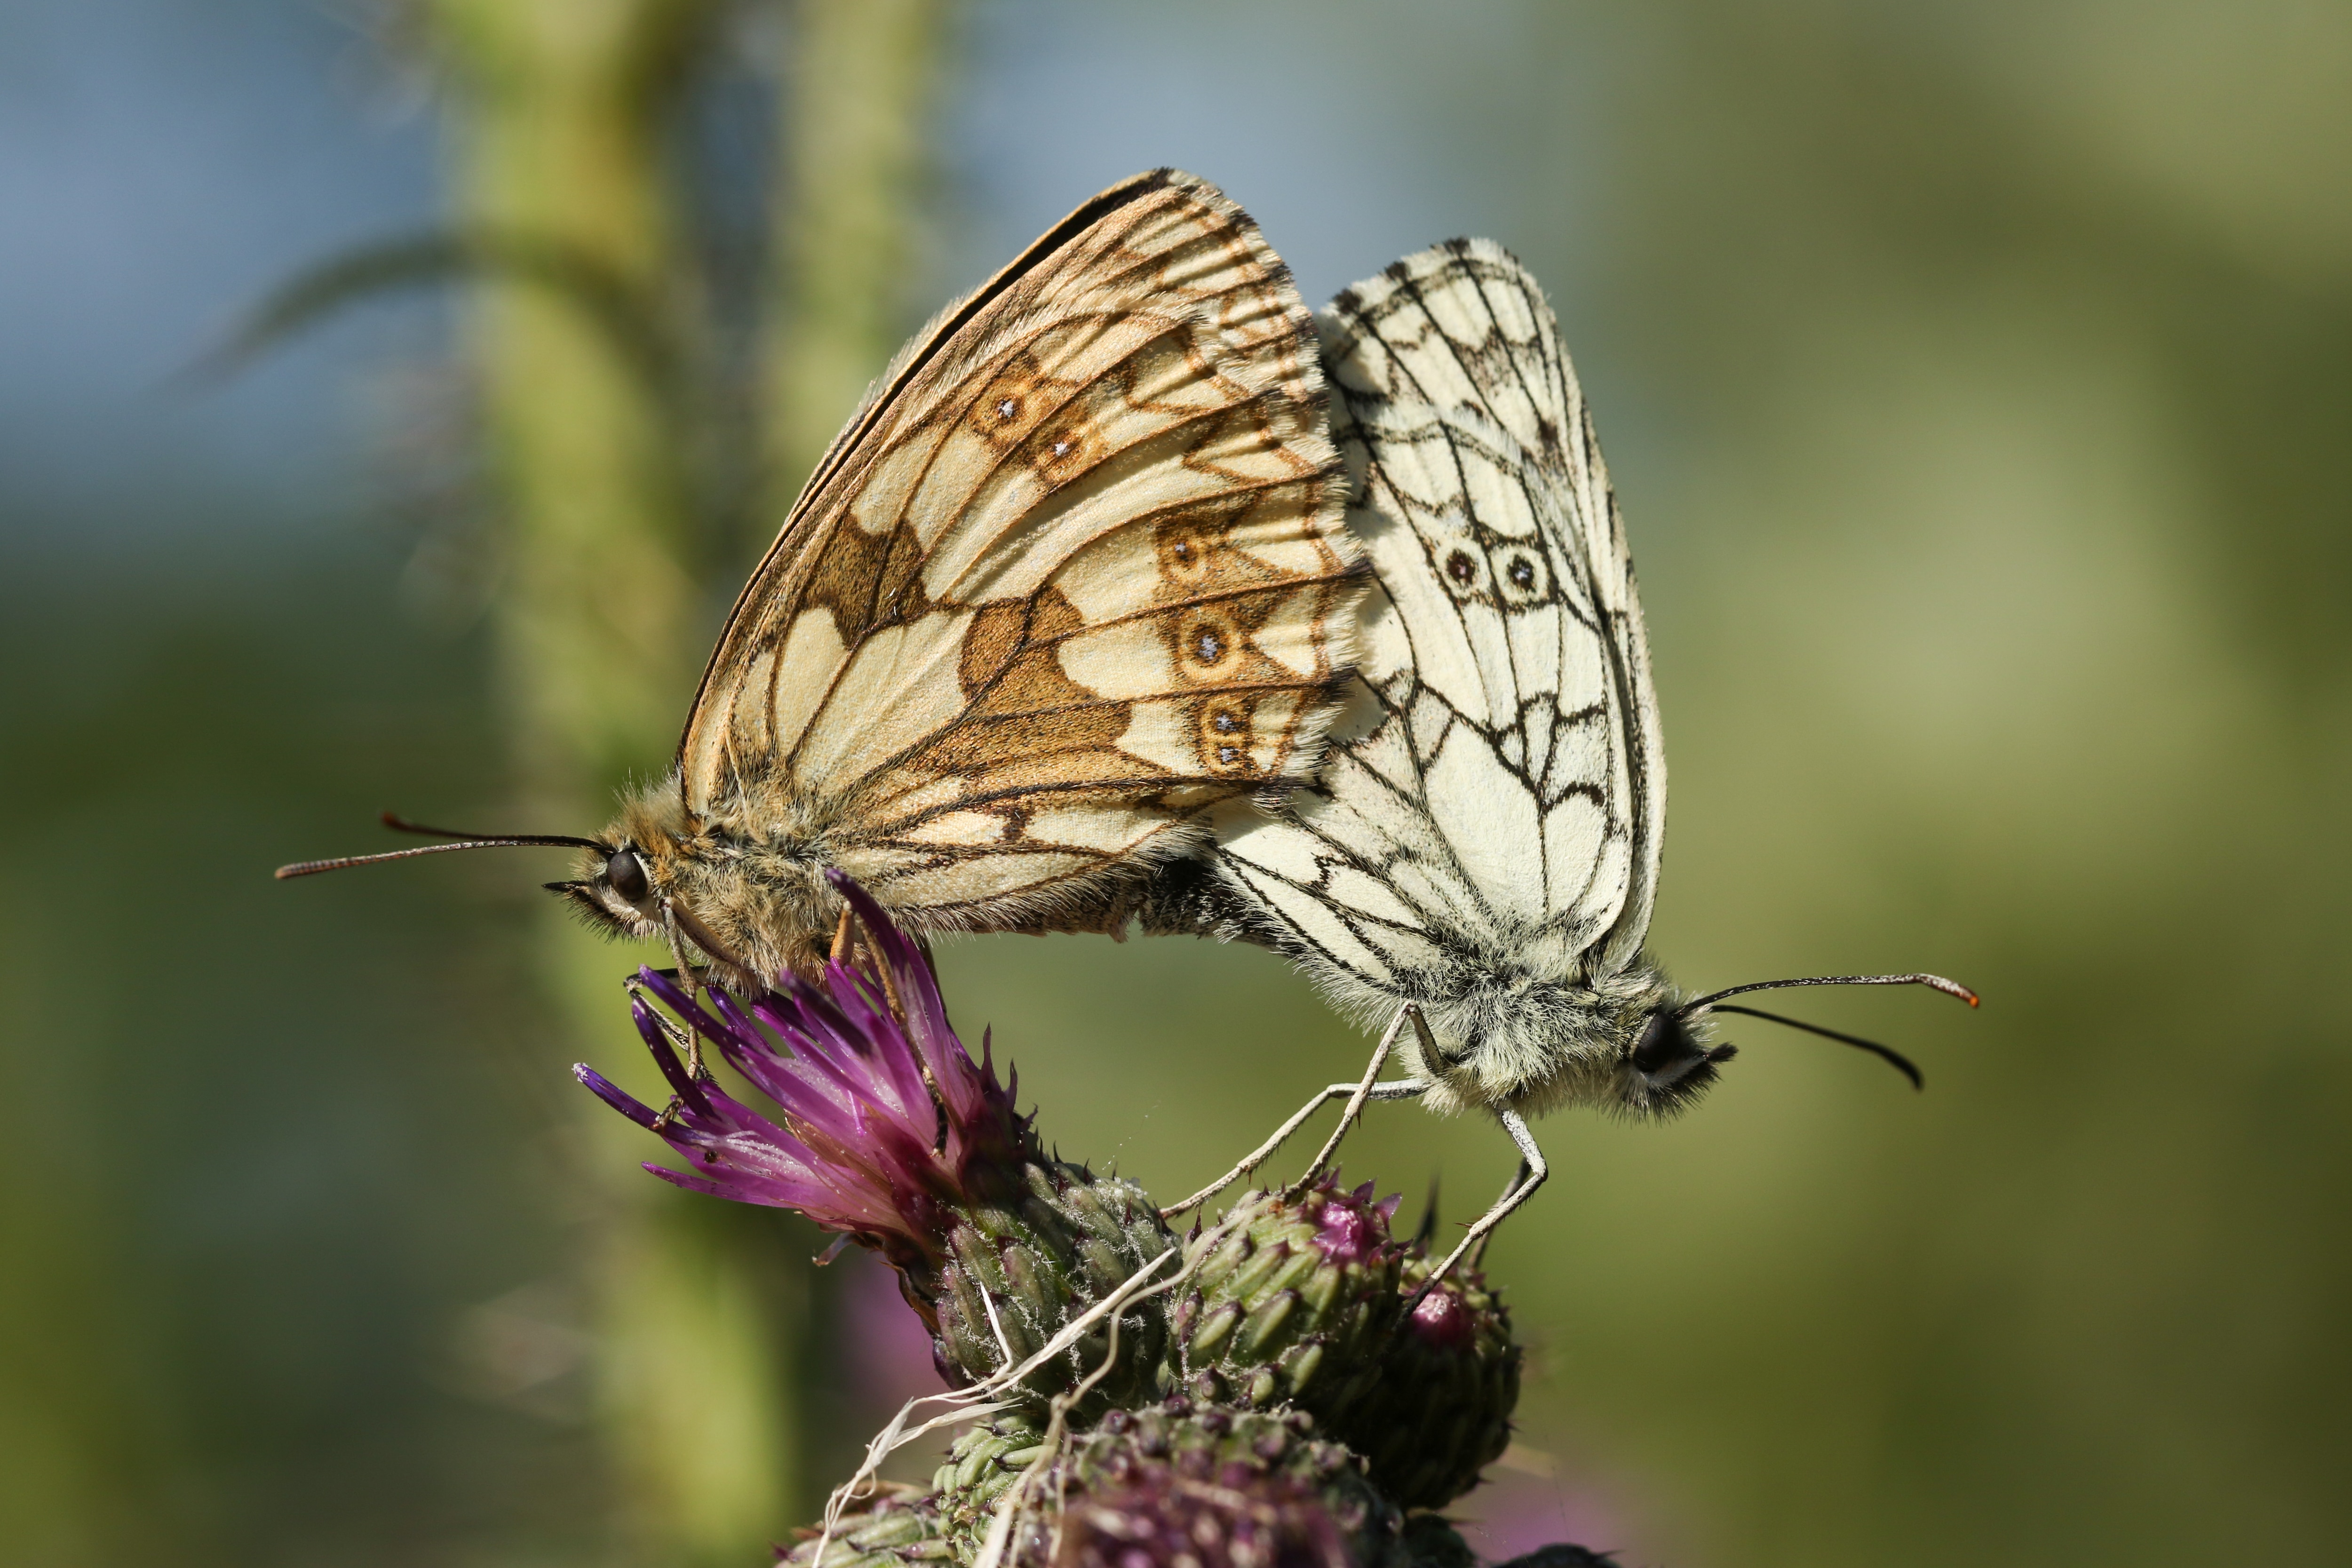 A mating pair of marbled white butterfly